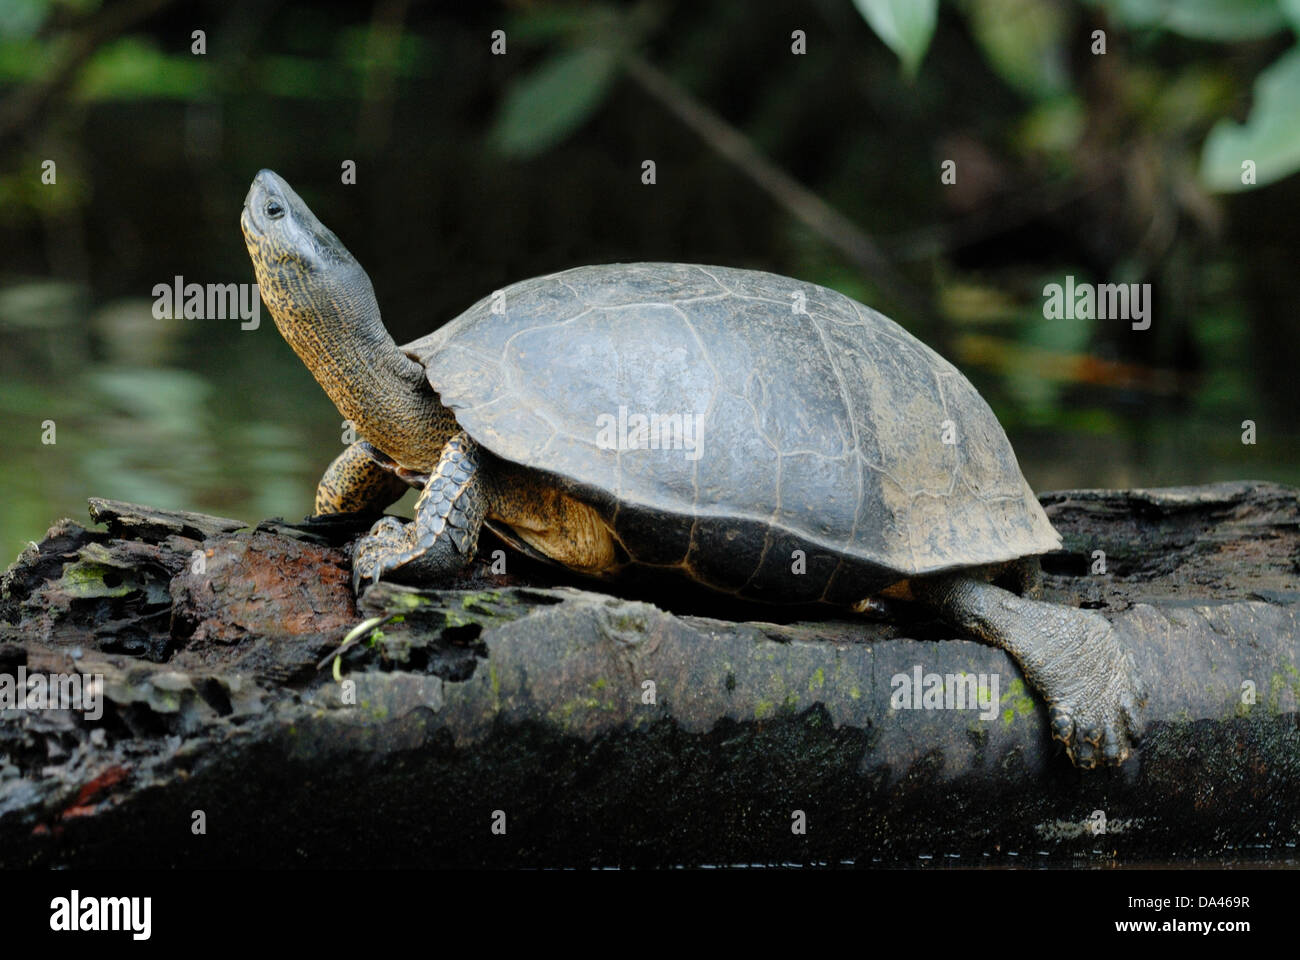 Black River Turtle (Rhinoclemmys funerea) adult basking on log in flooded forest Tortuguero N.P. Limon Province Costa Rica Stock Photo